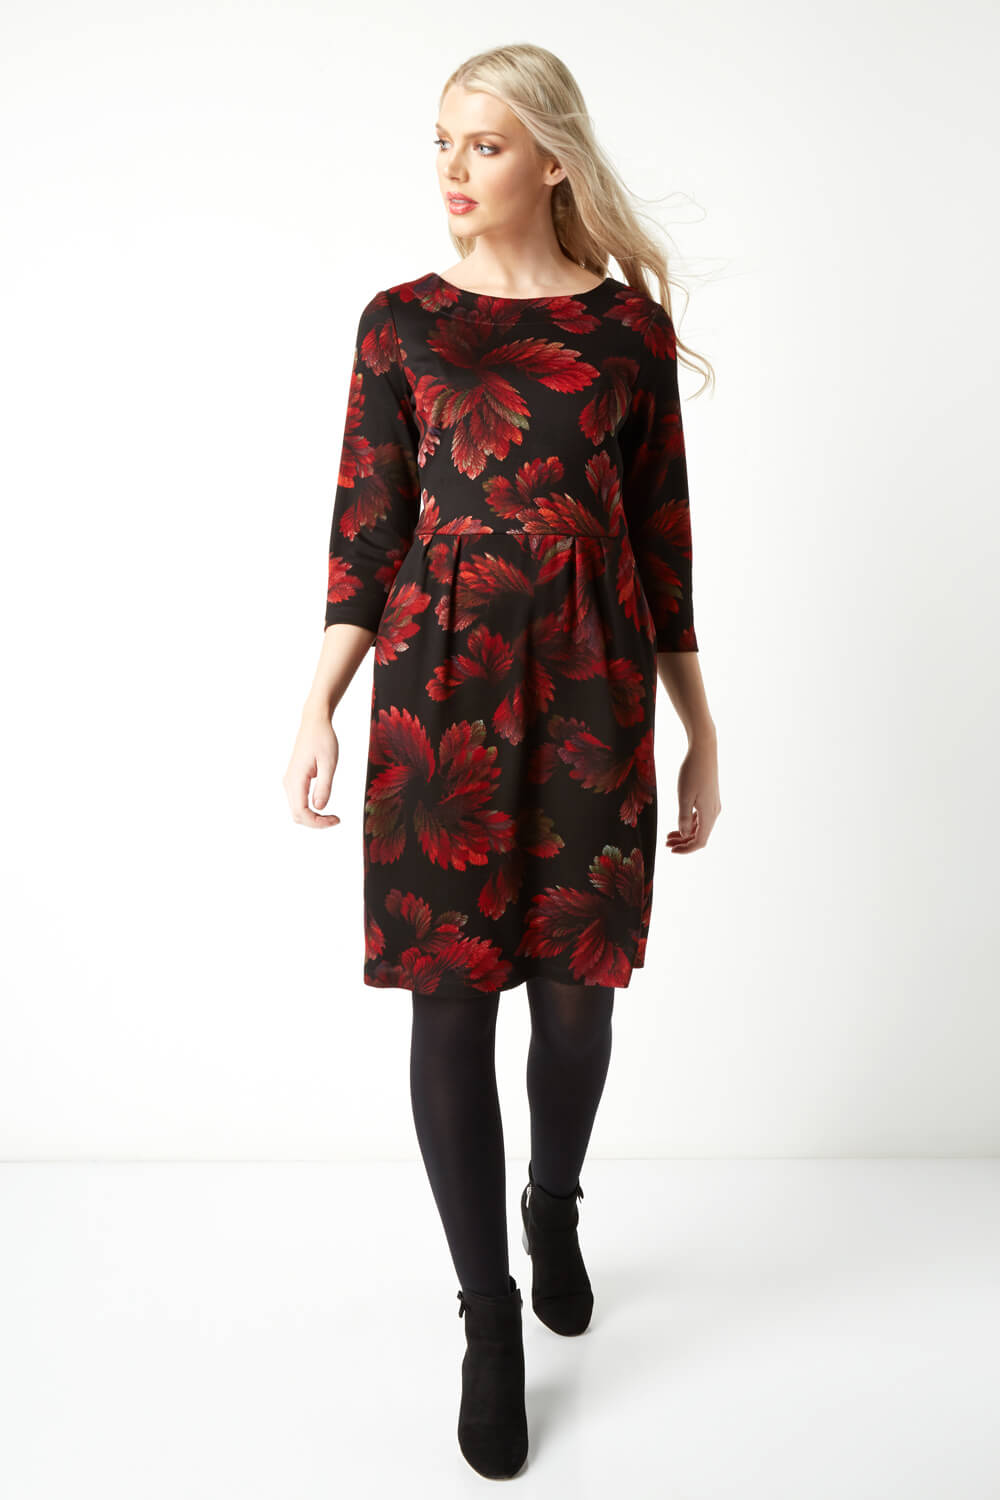 Floral Dress with Pockets in Red - Roman Originals UK